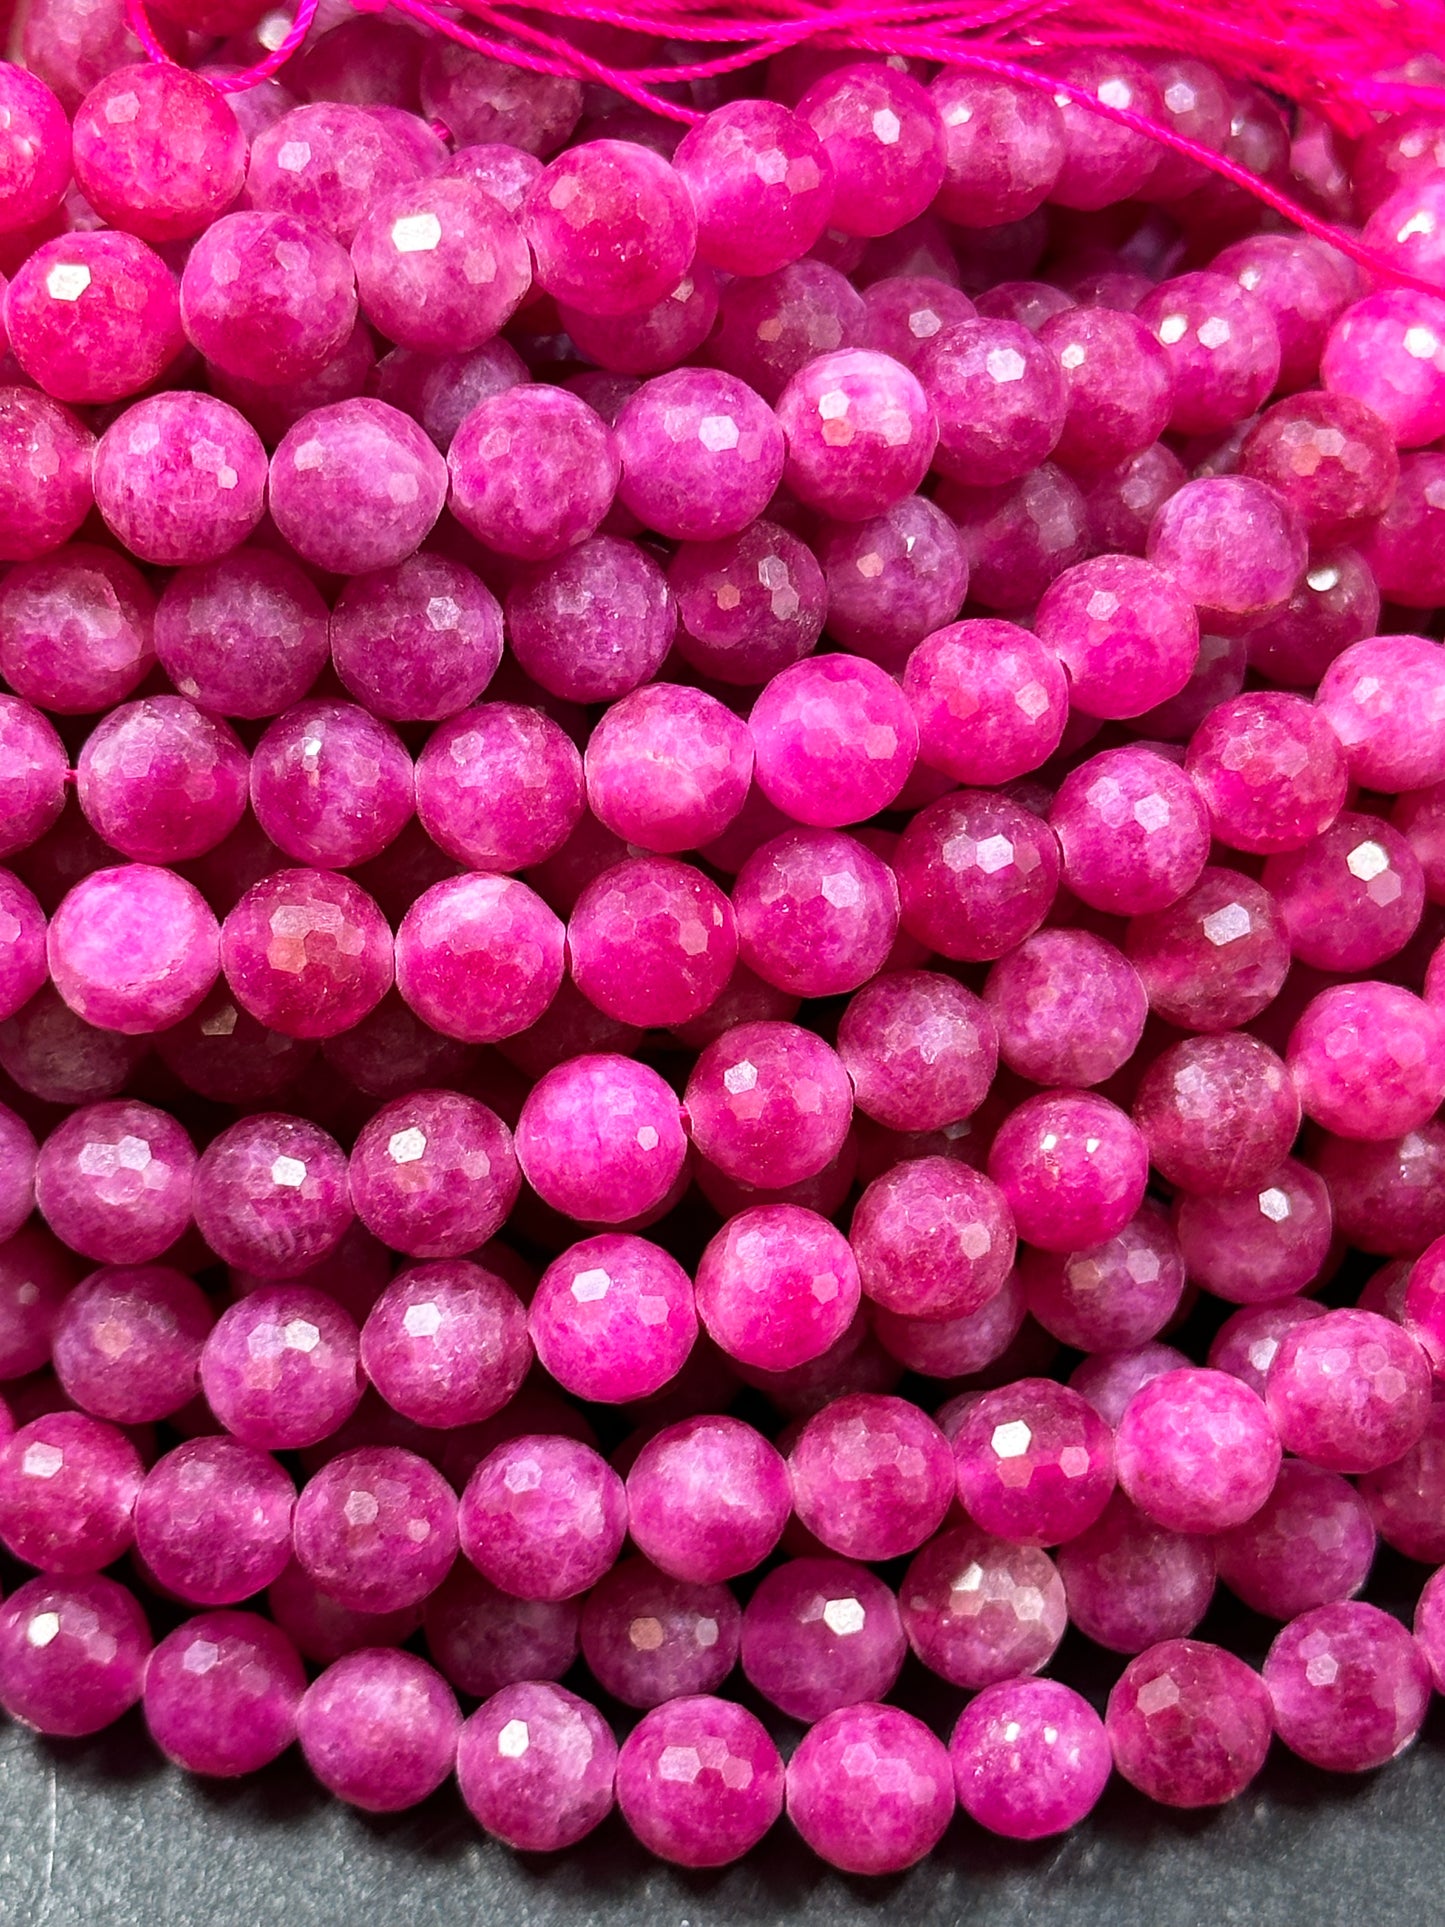 NATURAL Ruby Quartz Gemstone Bead Faceted 6mm 8mm 10mm Round Bead, Beautiful Pink Red Ruby Color Gemstone Bead Full Strand 15.5"